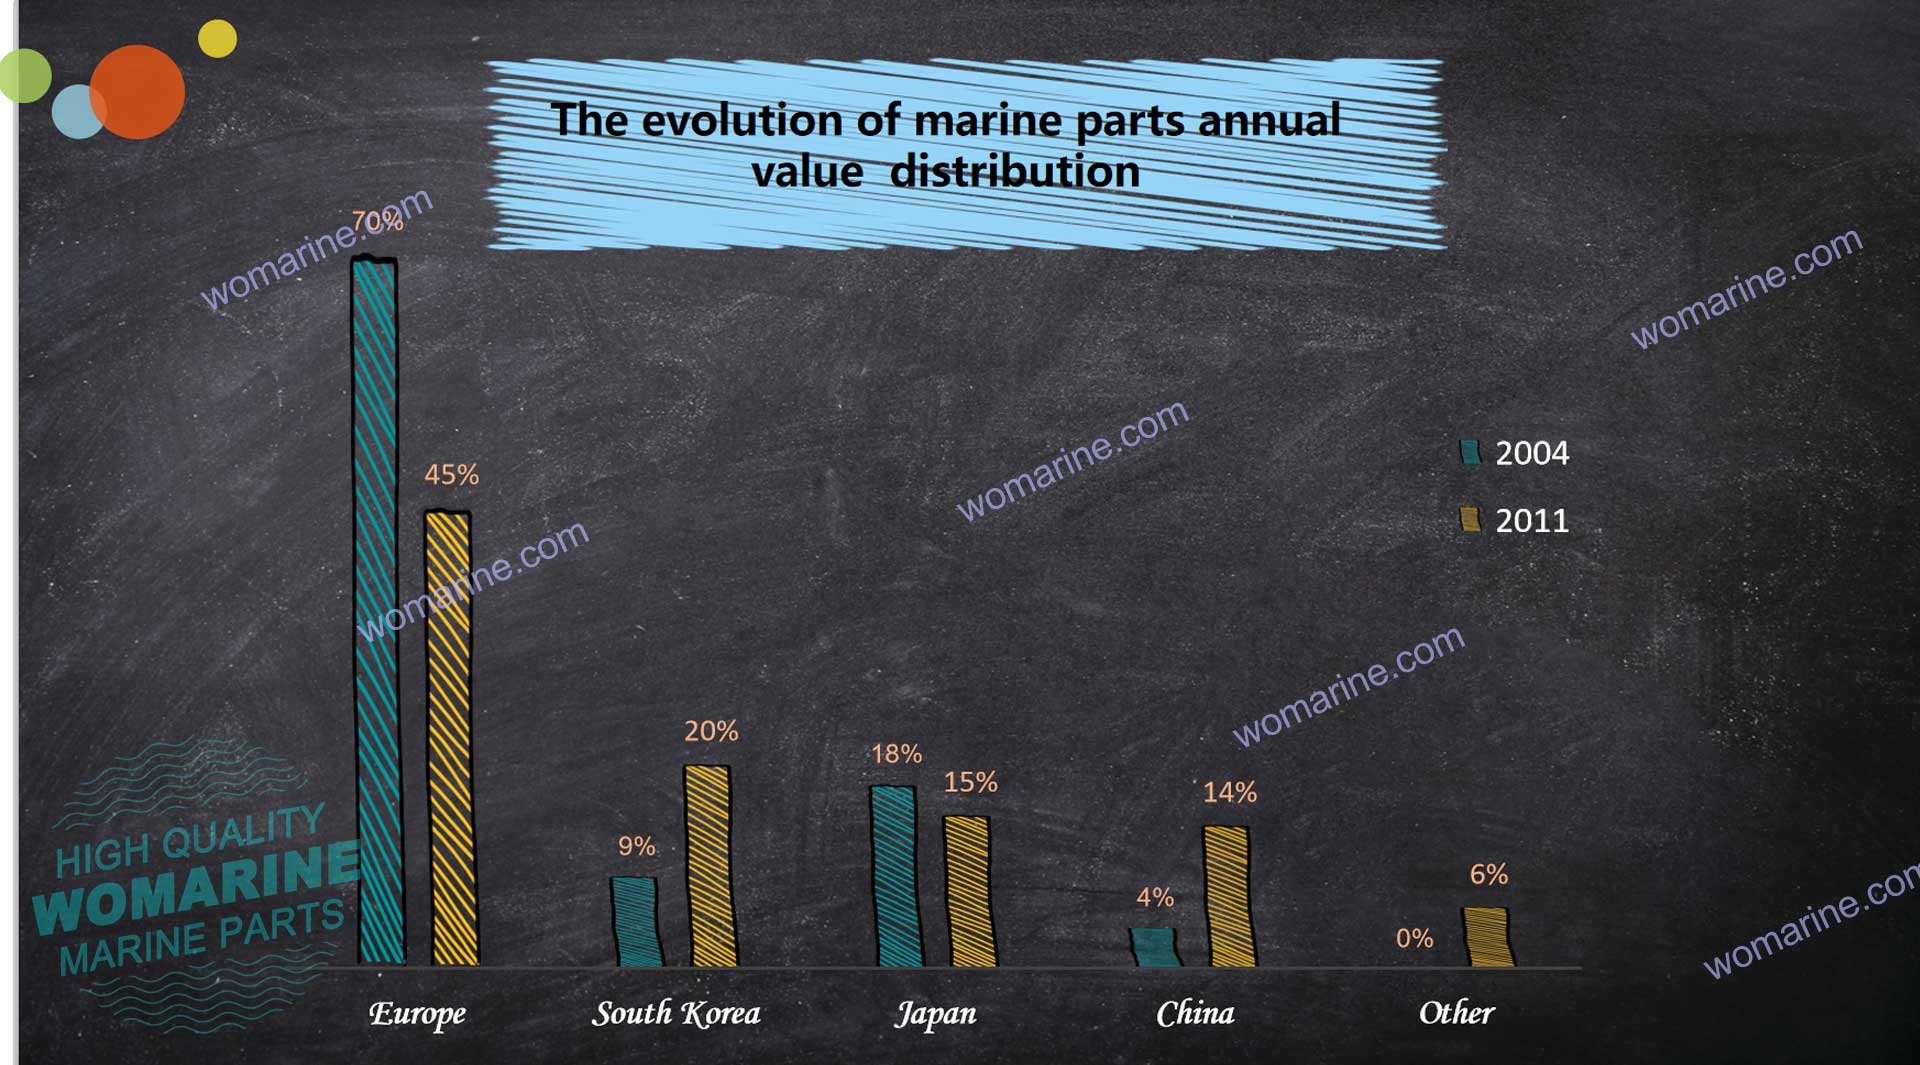 The evolution of marine parts annual value distribution